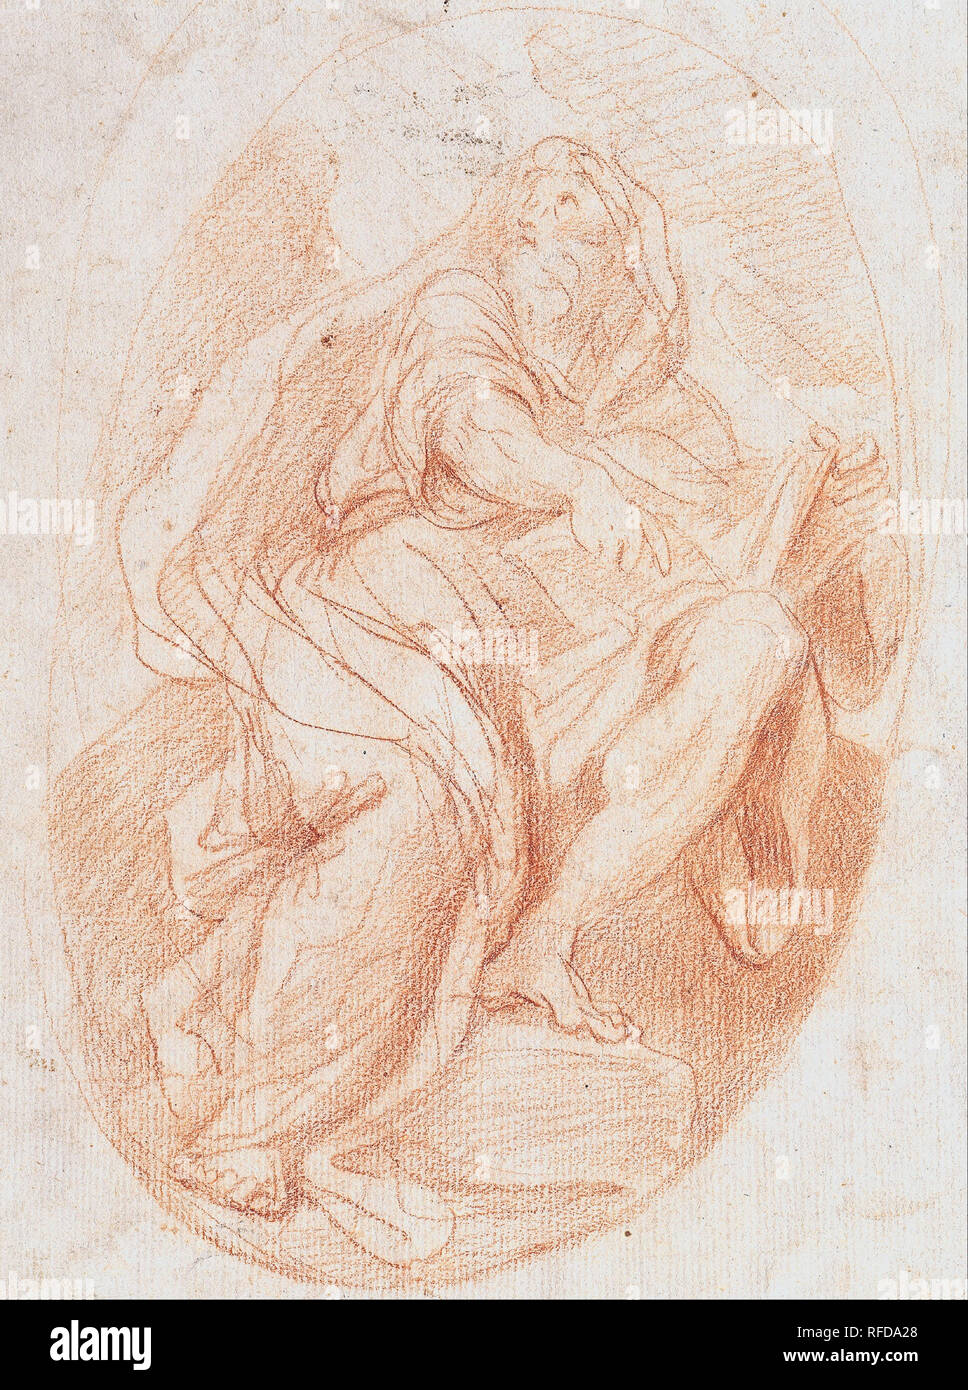 The Prophet Baruch. Date/Period: 1718. Red chalk. Rötel. Height: 265 mm (10.43 in); Width: 205 mm (8.07 in). Author: FRANCESCO TREVISANI. Stock Photo